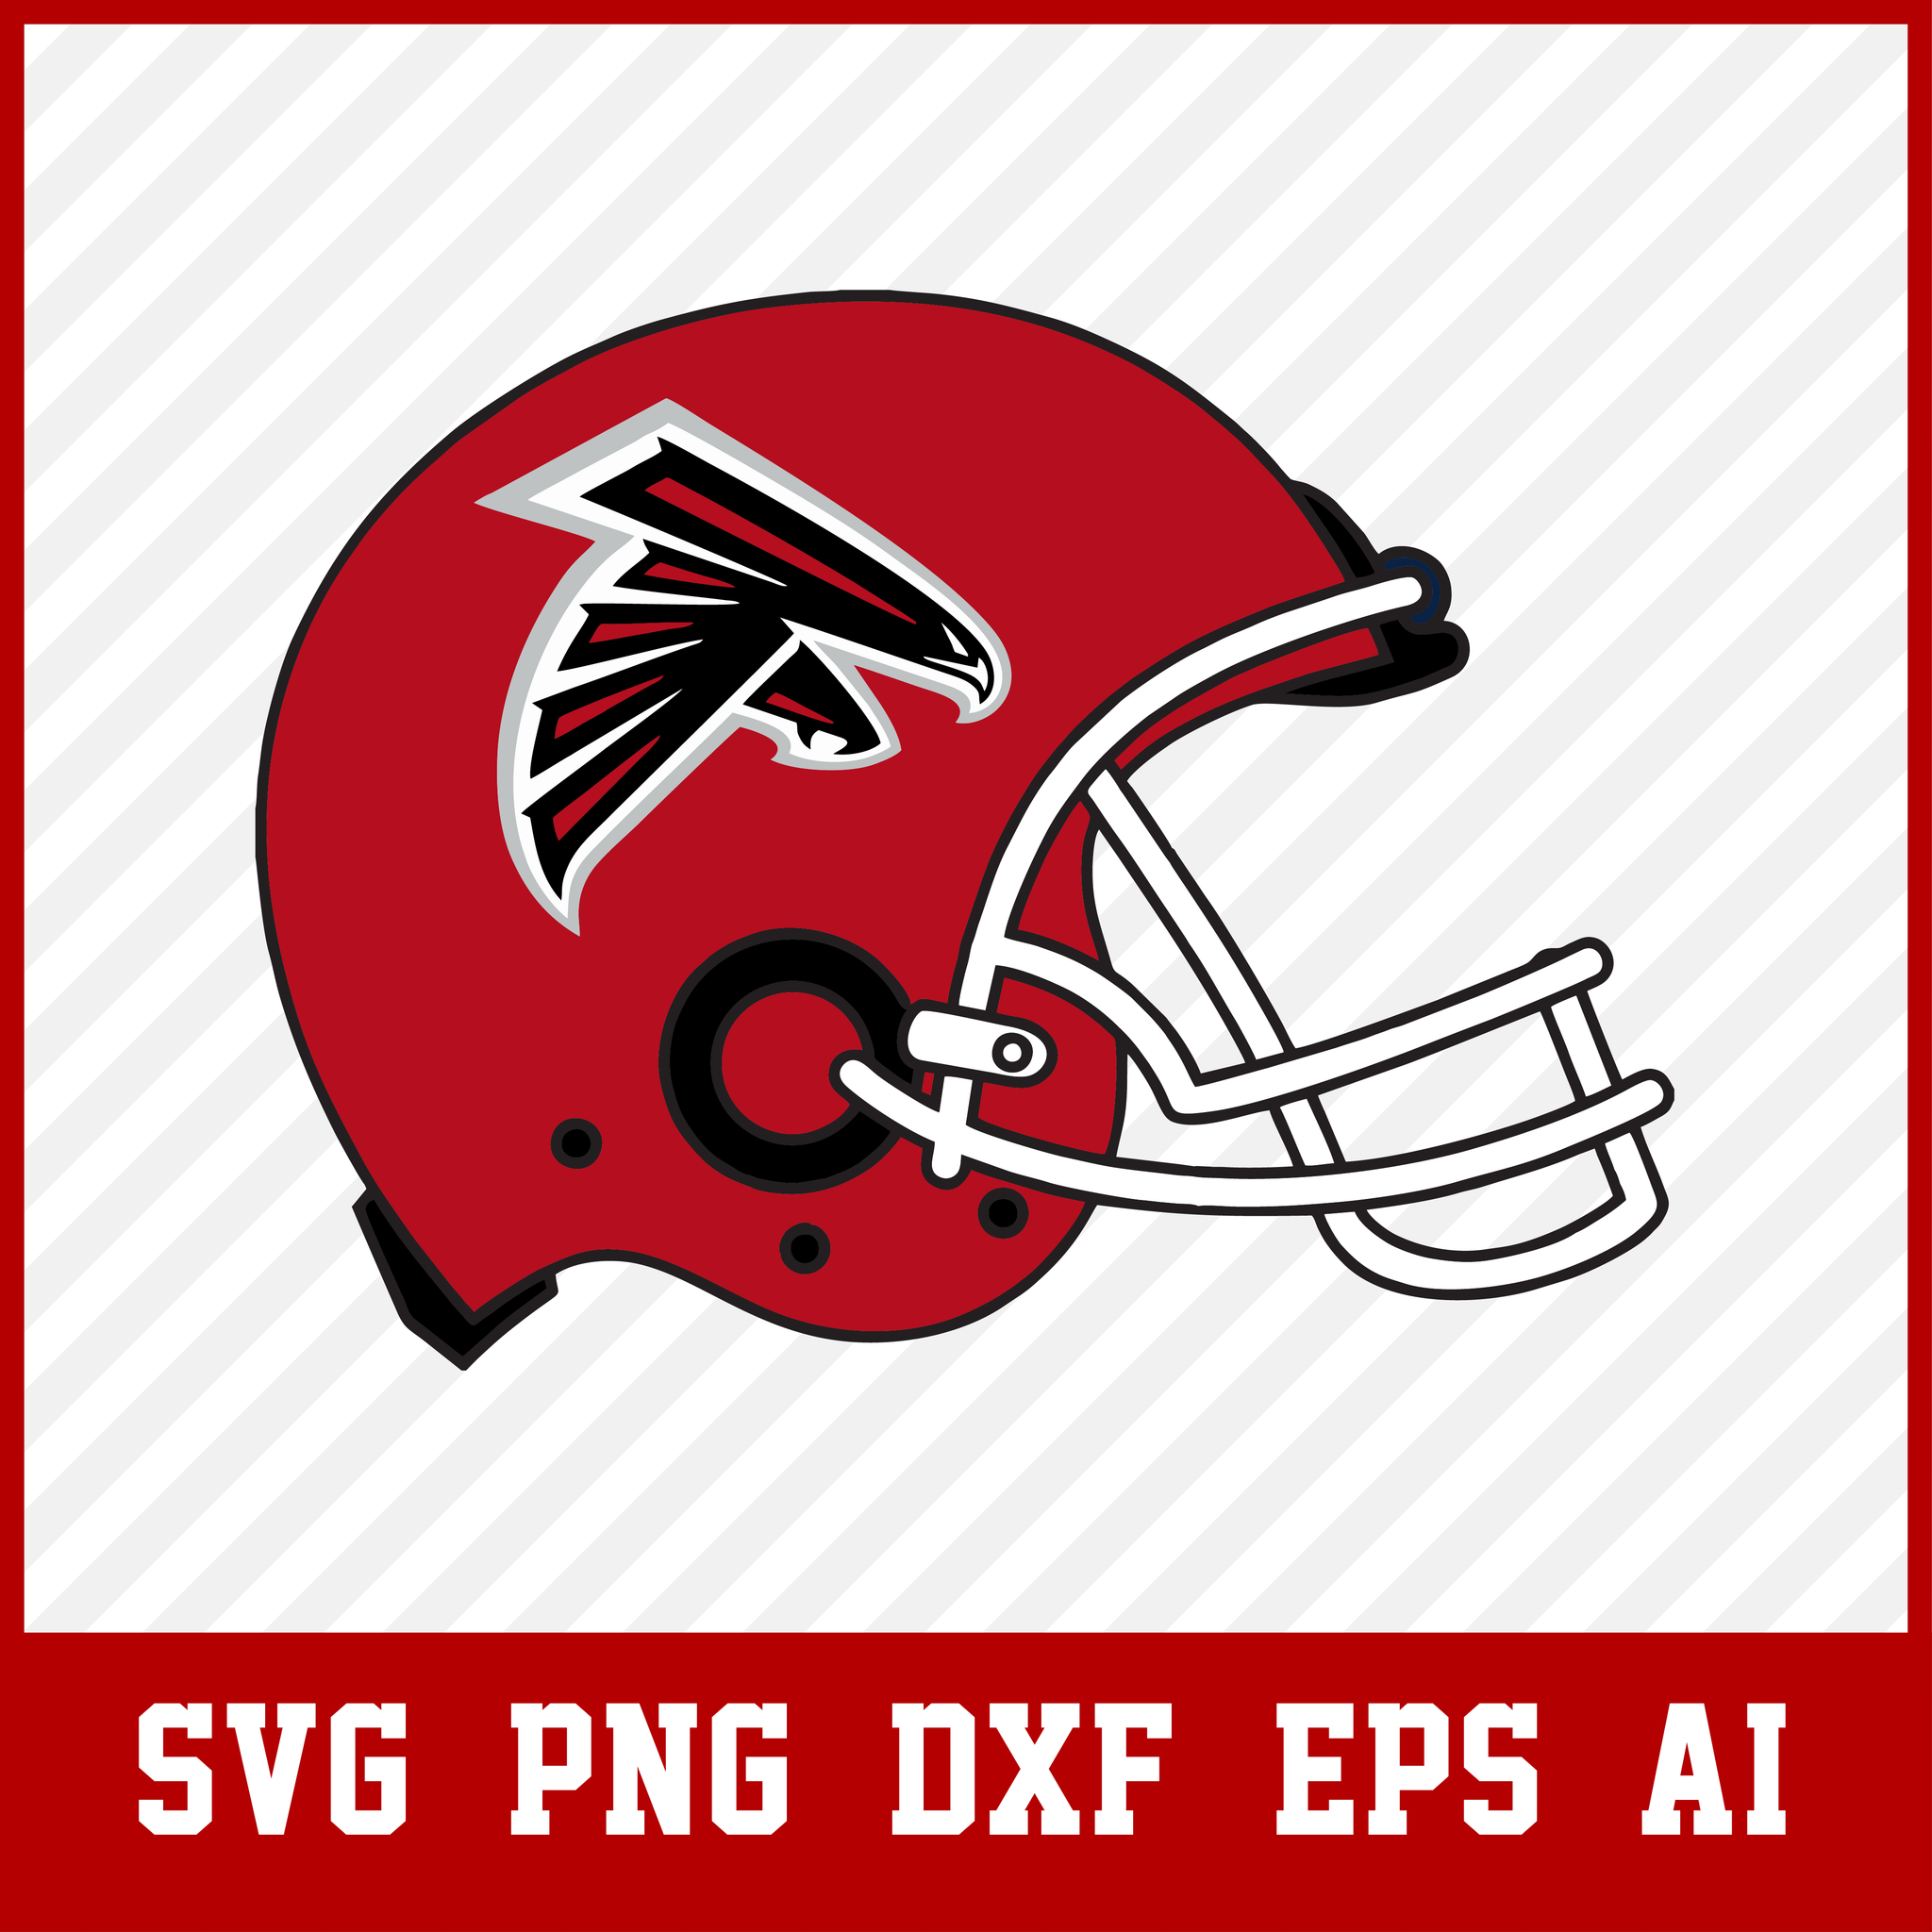 Atlanta Falcons Helmet Svg - Png, Falcons Svg, Atlanta Falcons Svg Files For Cricut, Atlanta Falcons Logo Svg, Atlanta Falcons Cut File.  • INSTANT Digital DOWNLOAD includes: 1 Zip and the following file formats: SVG, DXF, PNG, AI, PDF  • Artwork files are perfect for printing, resizing, coloring and modifying with the appropriate software.